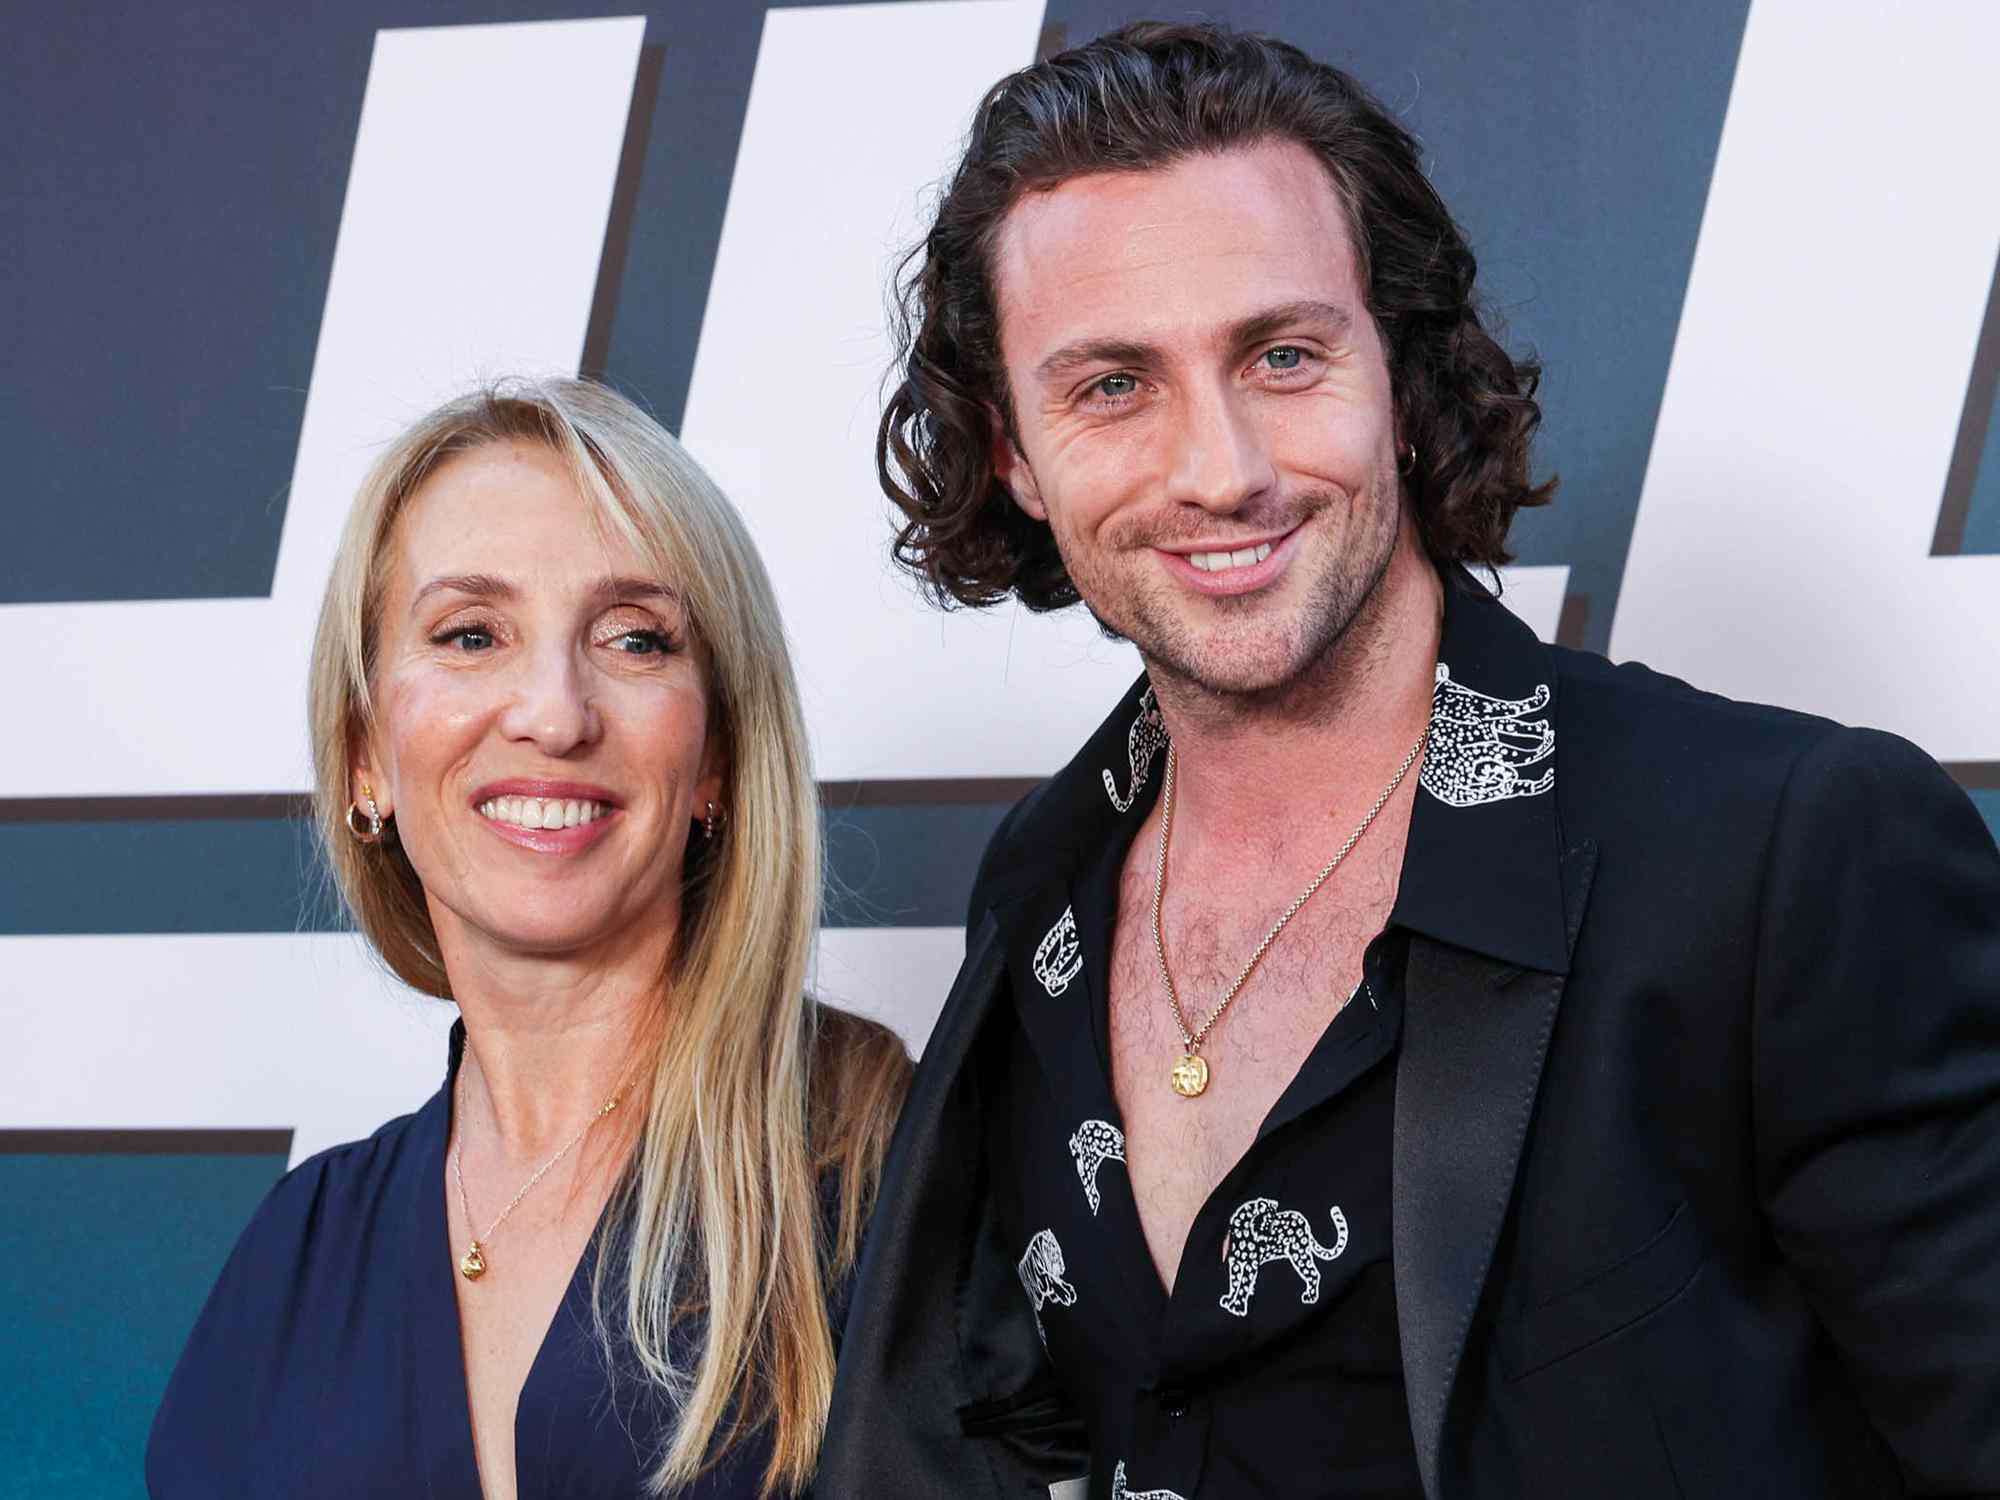 Sam Taylor-Johnson and Aaron Taylor-Johnson attend "Bullet Train" Premiere At Le Grand Rex on July 18, 2022 in Paris, France